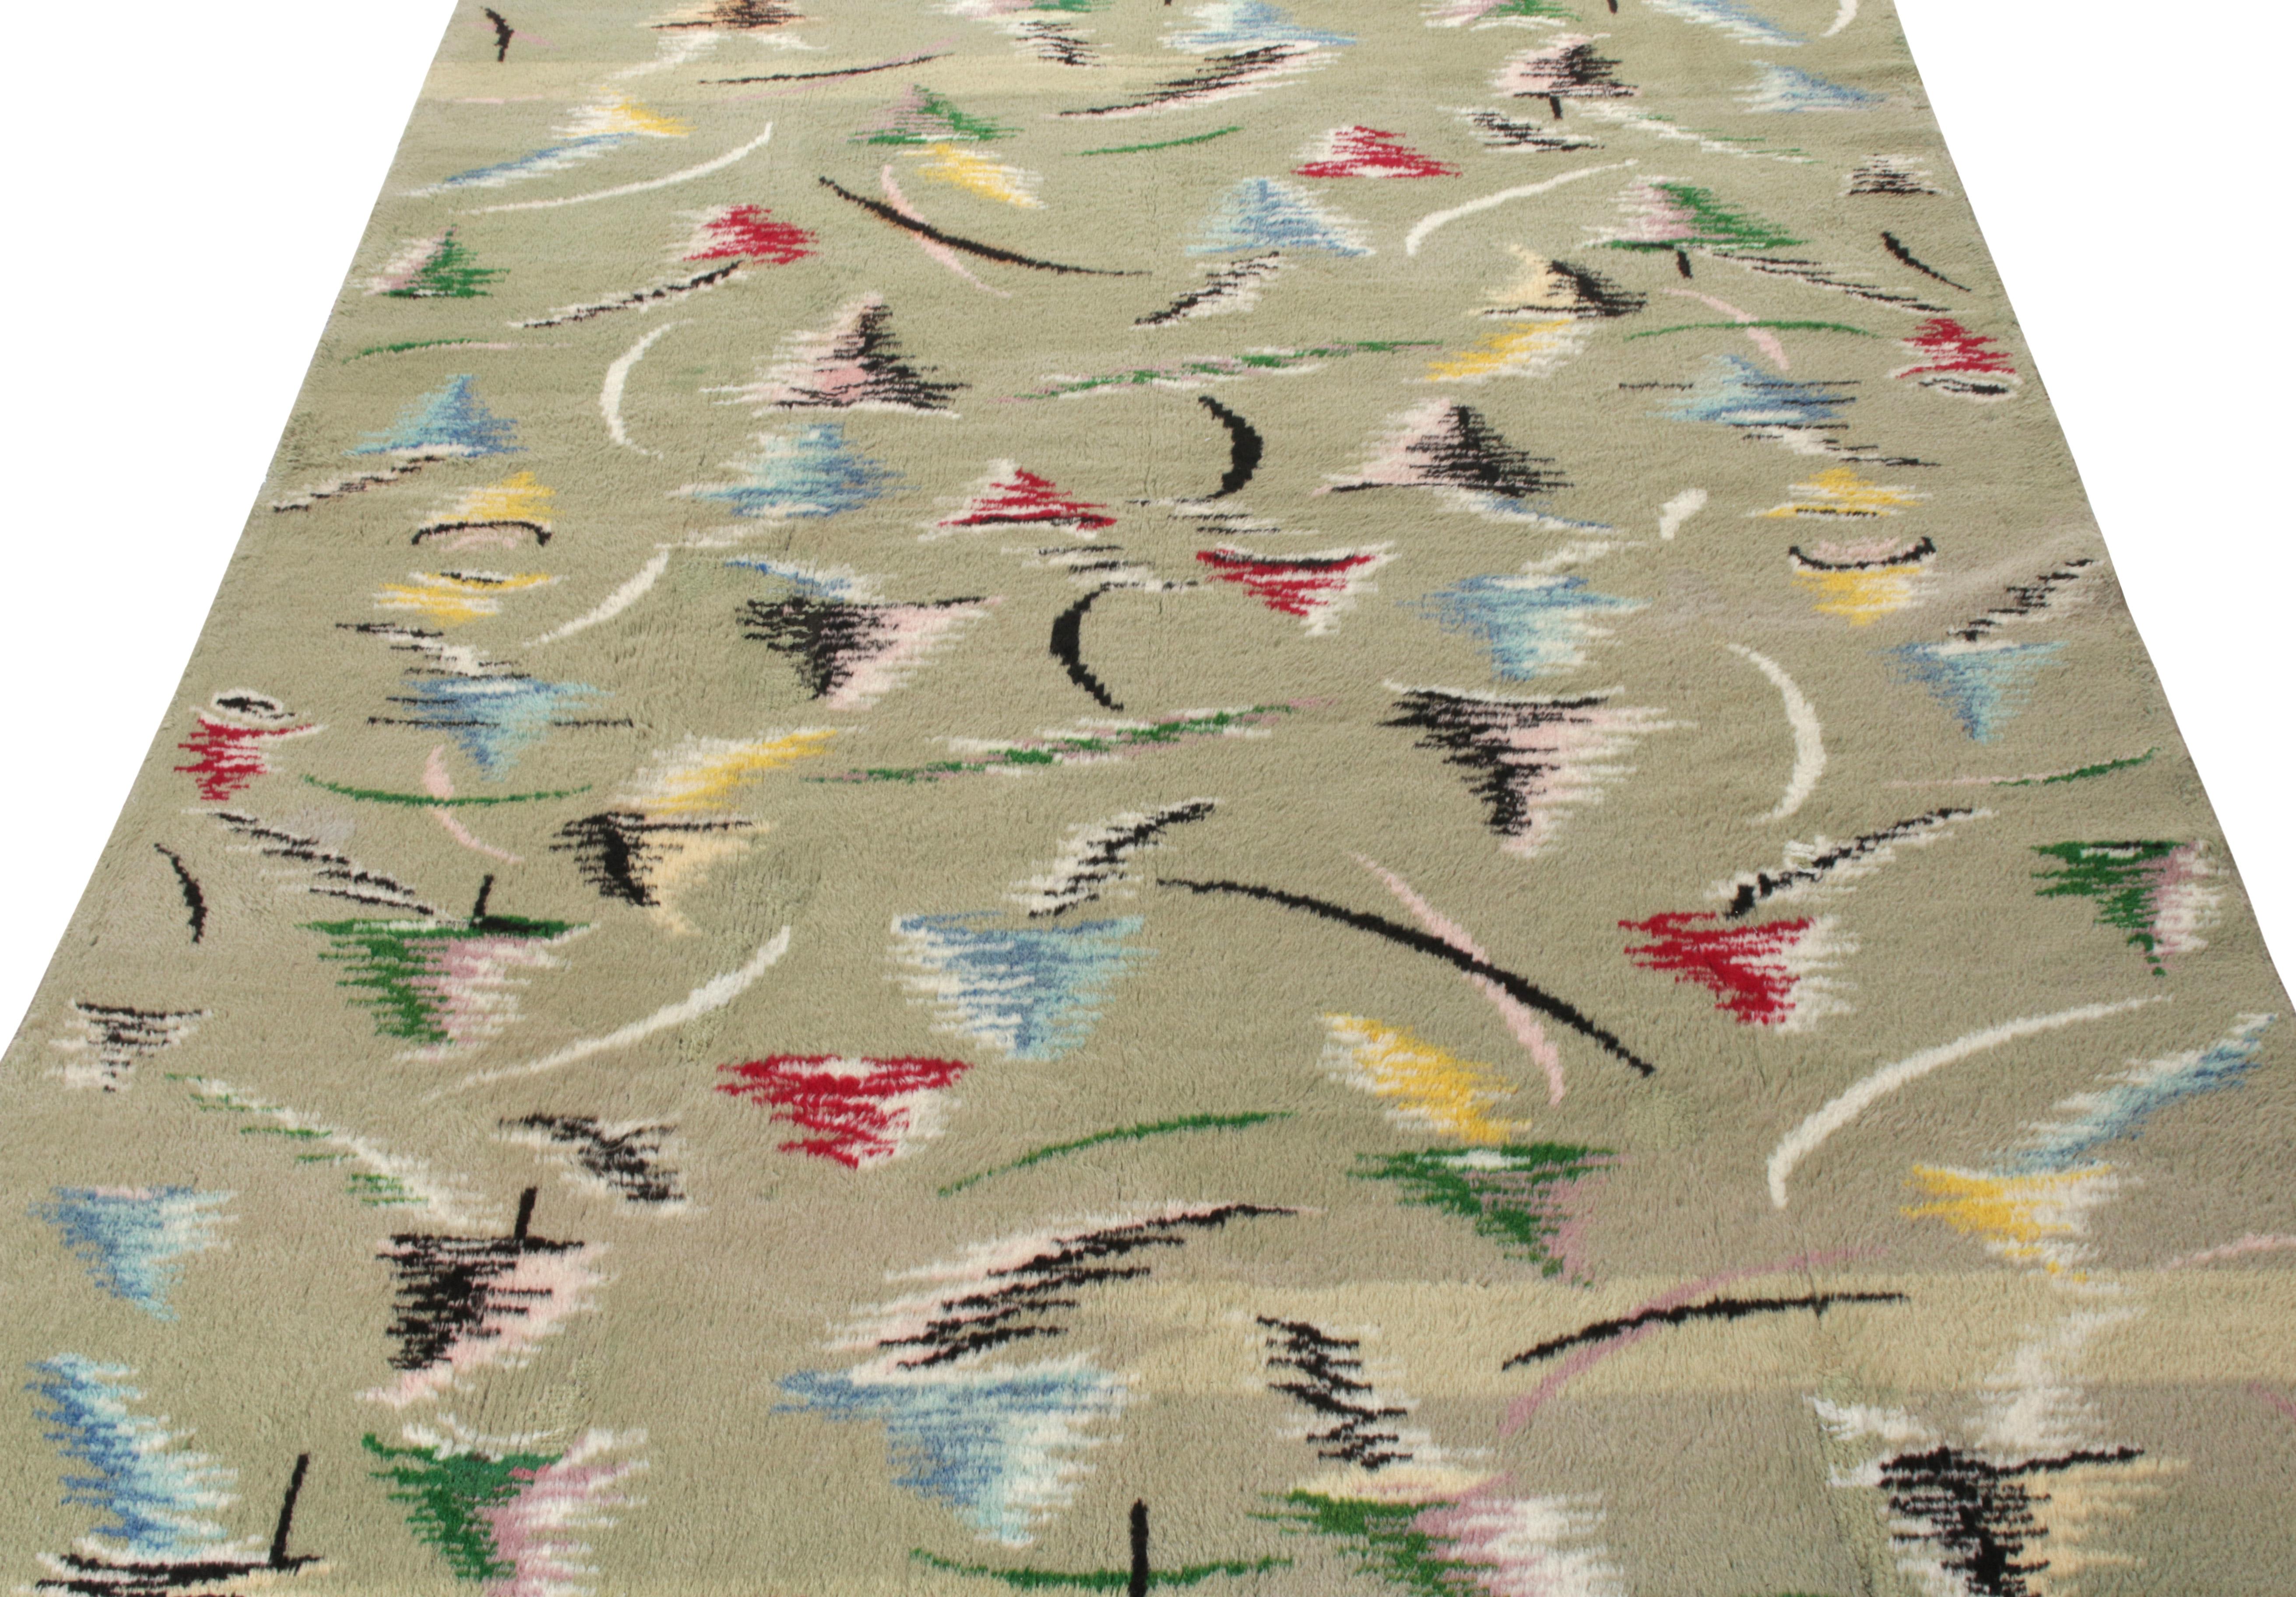 Hand-knotted in wool, a vintage 6x10 Art Deco rug selection from Turkish designer Zeki Muren, entering Rug & Kilim’s commemorative Mid-Century Pasha Collection. The mature, yet playful mid-century modern piece revels in a thoughtful pale green